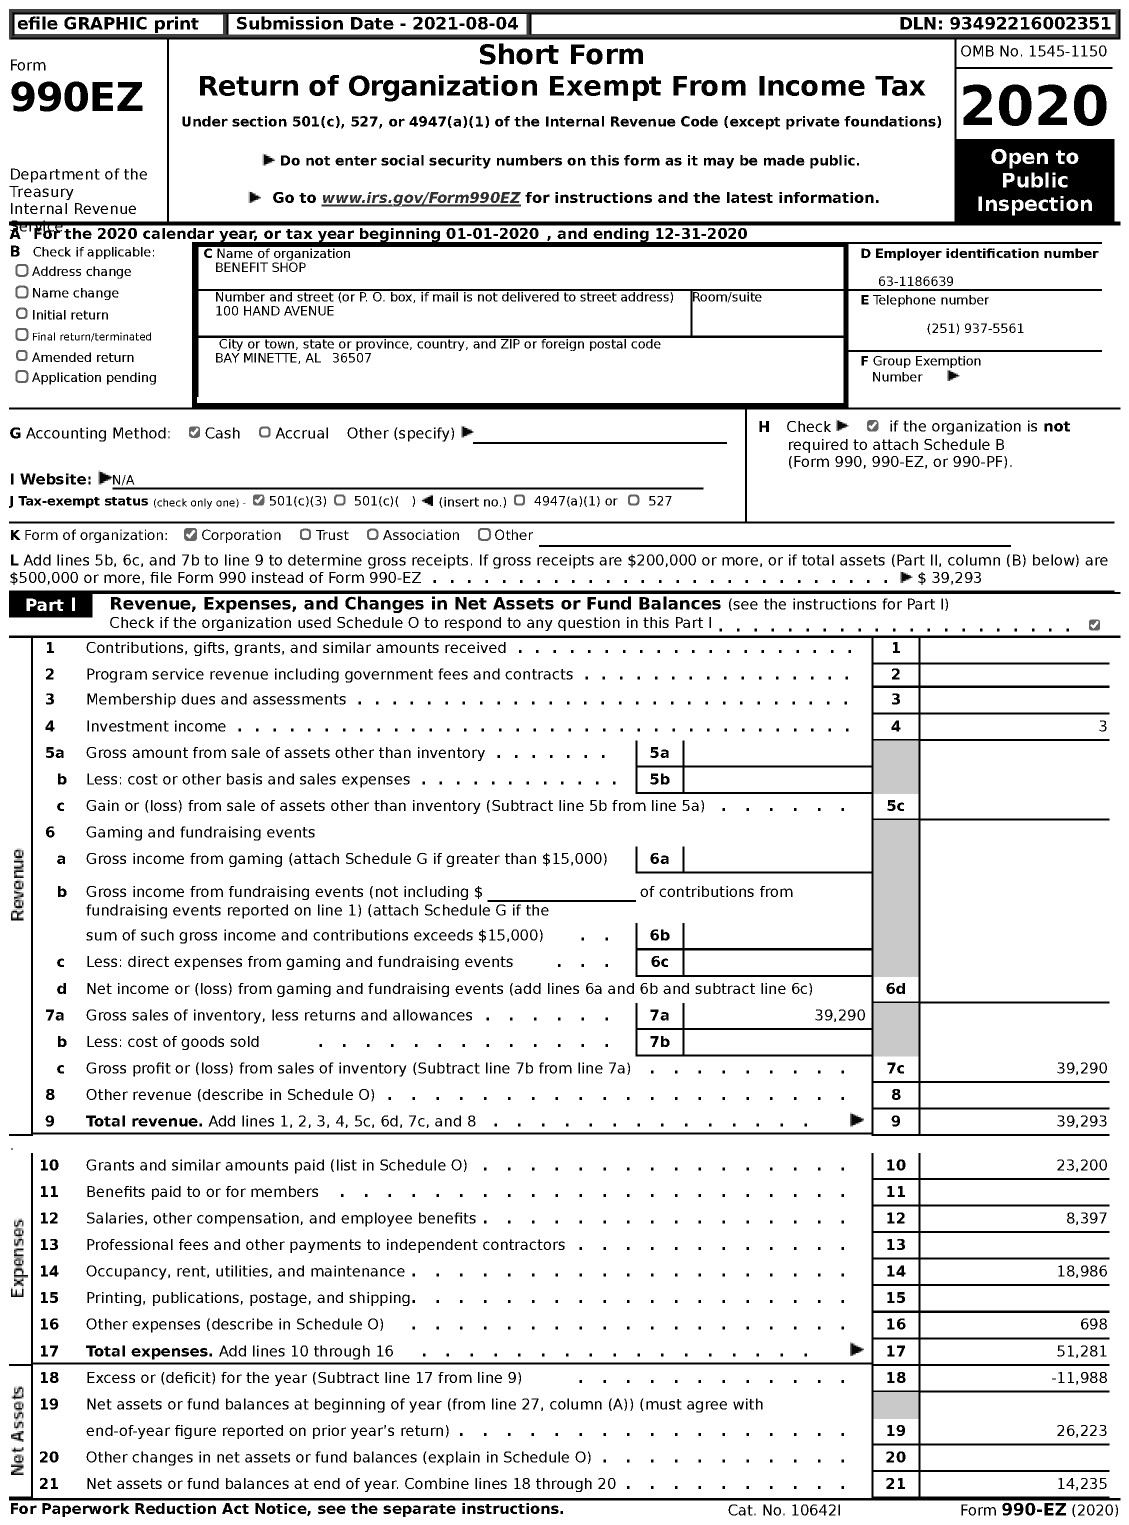 Image of first page of 2020 Form 990EZ for Benefit Shop